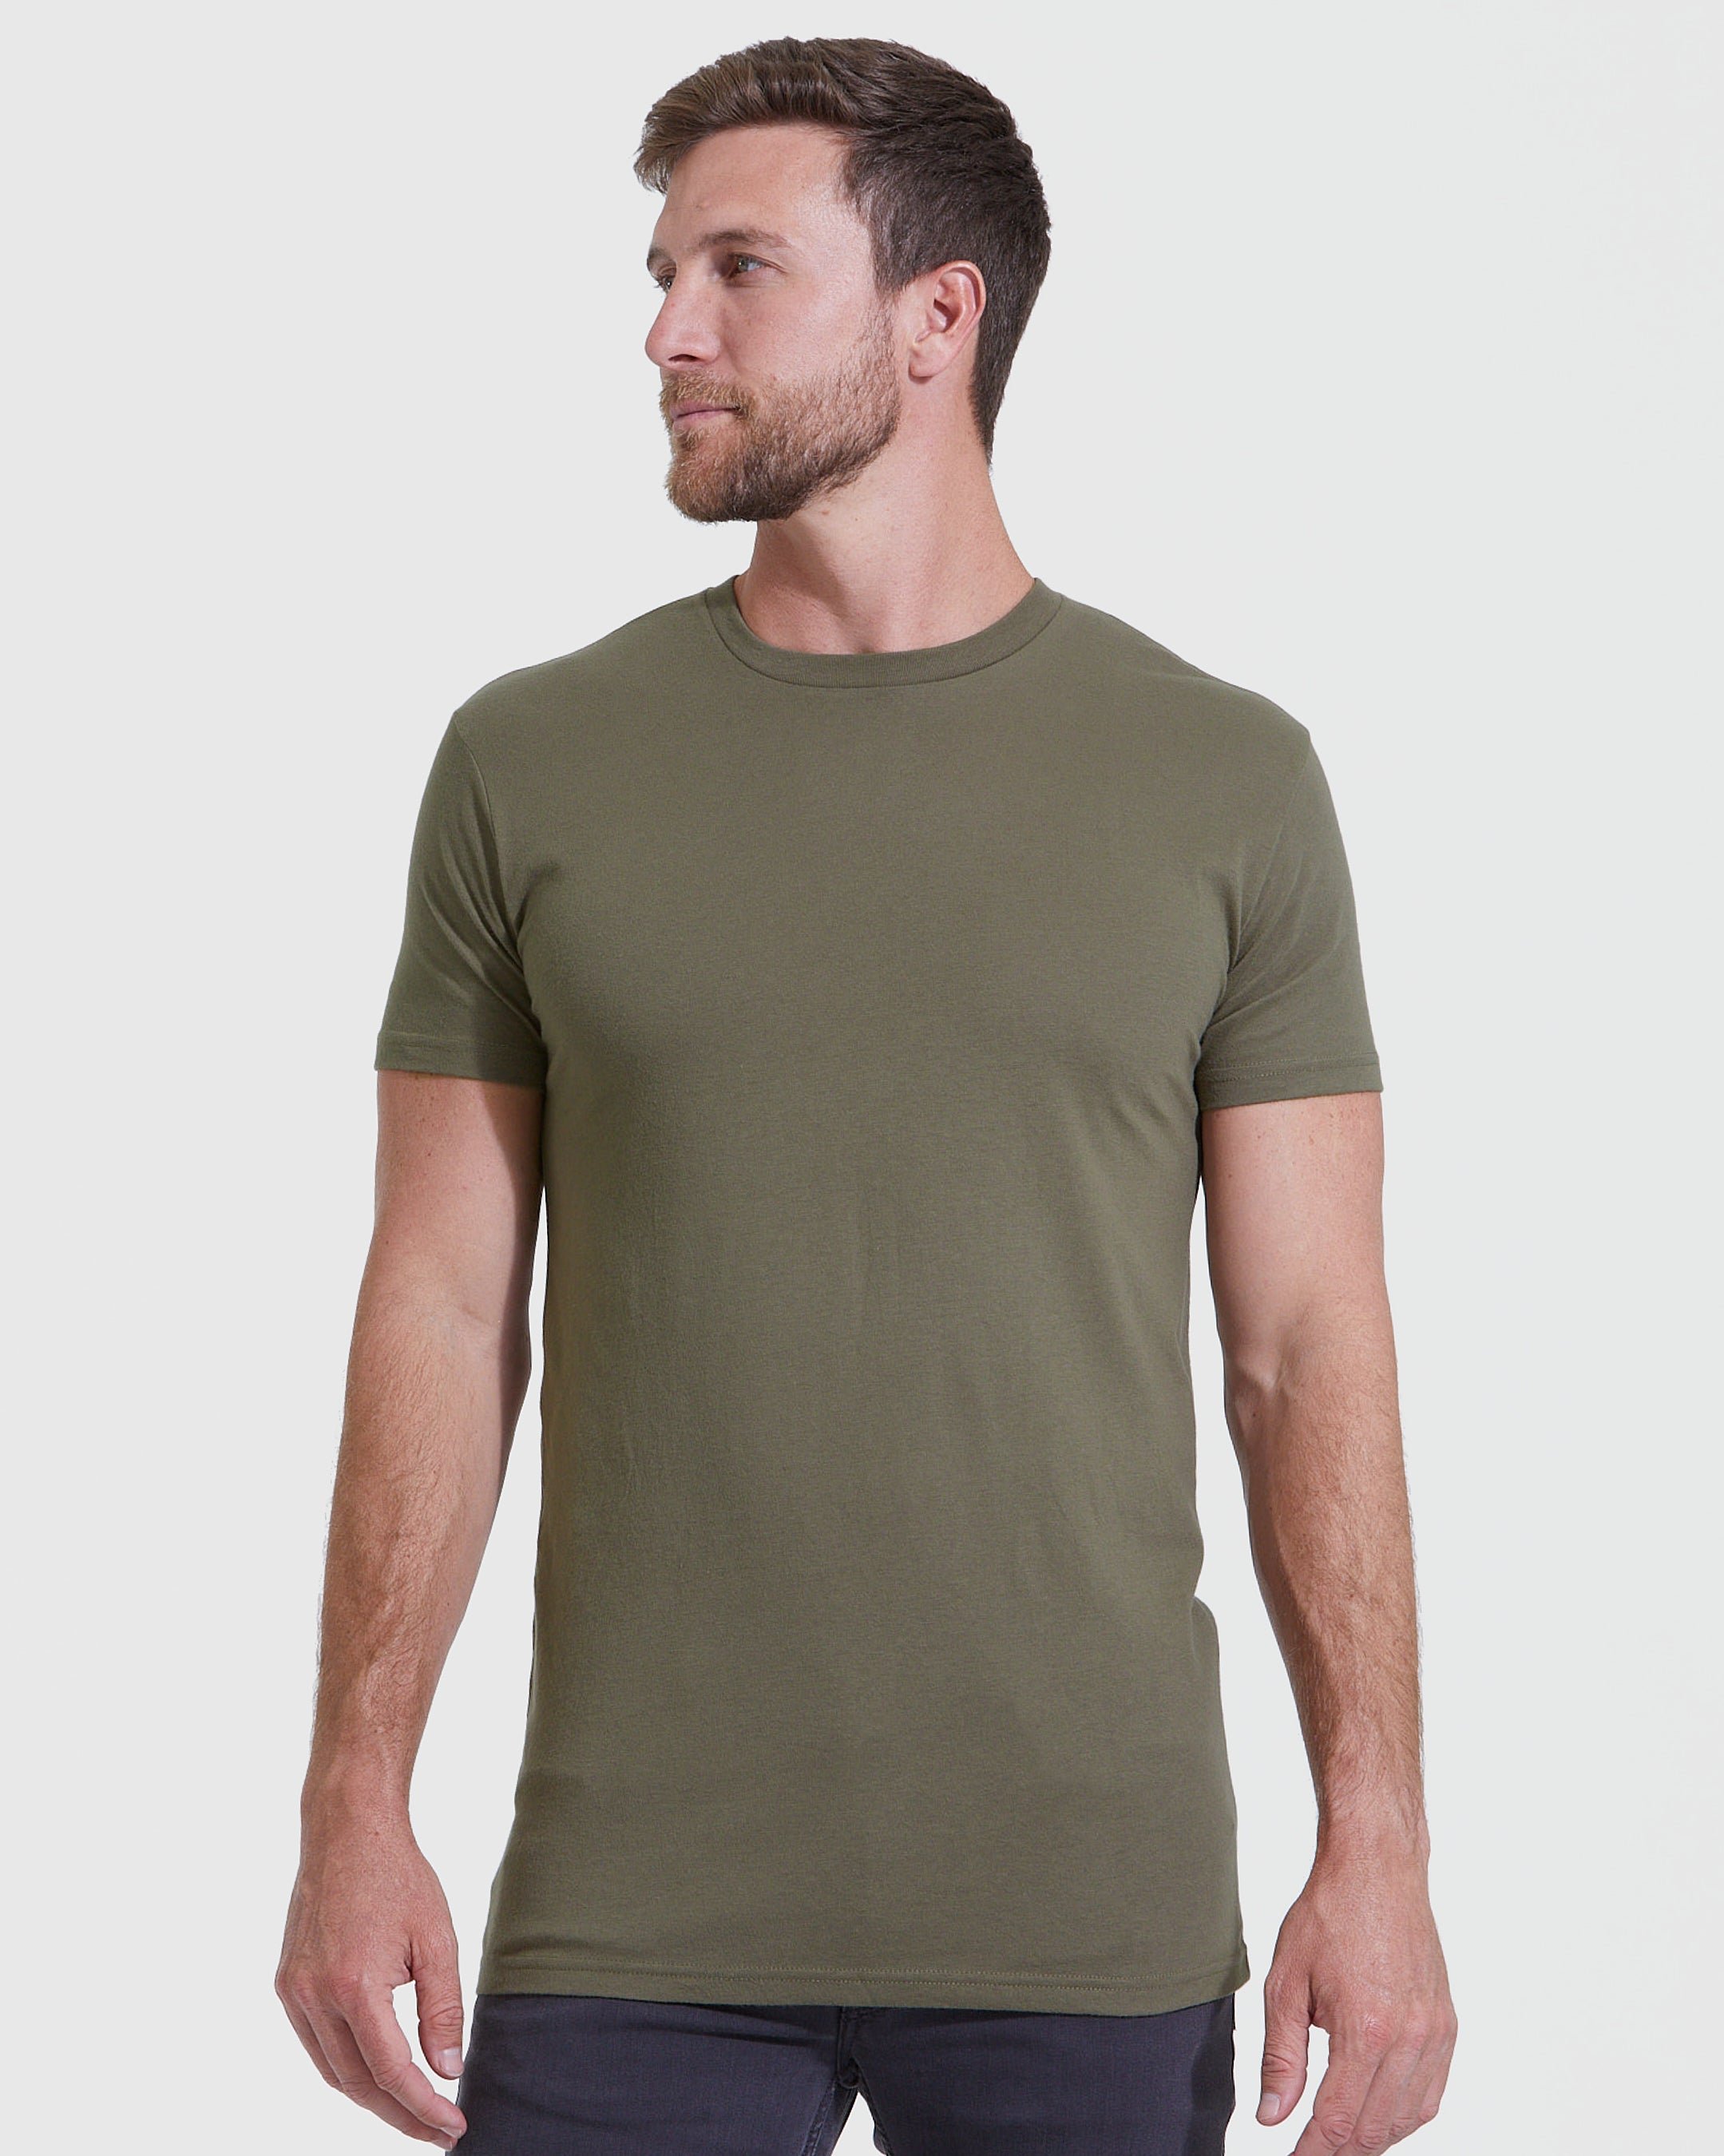 The Tall Round Hem Crew Neck T-Shirt Color 3-Pack